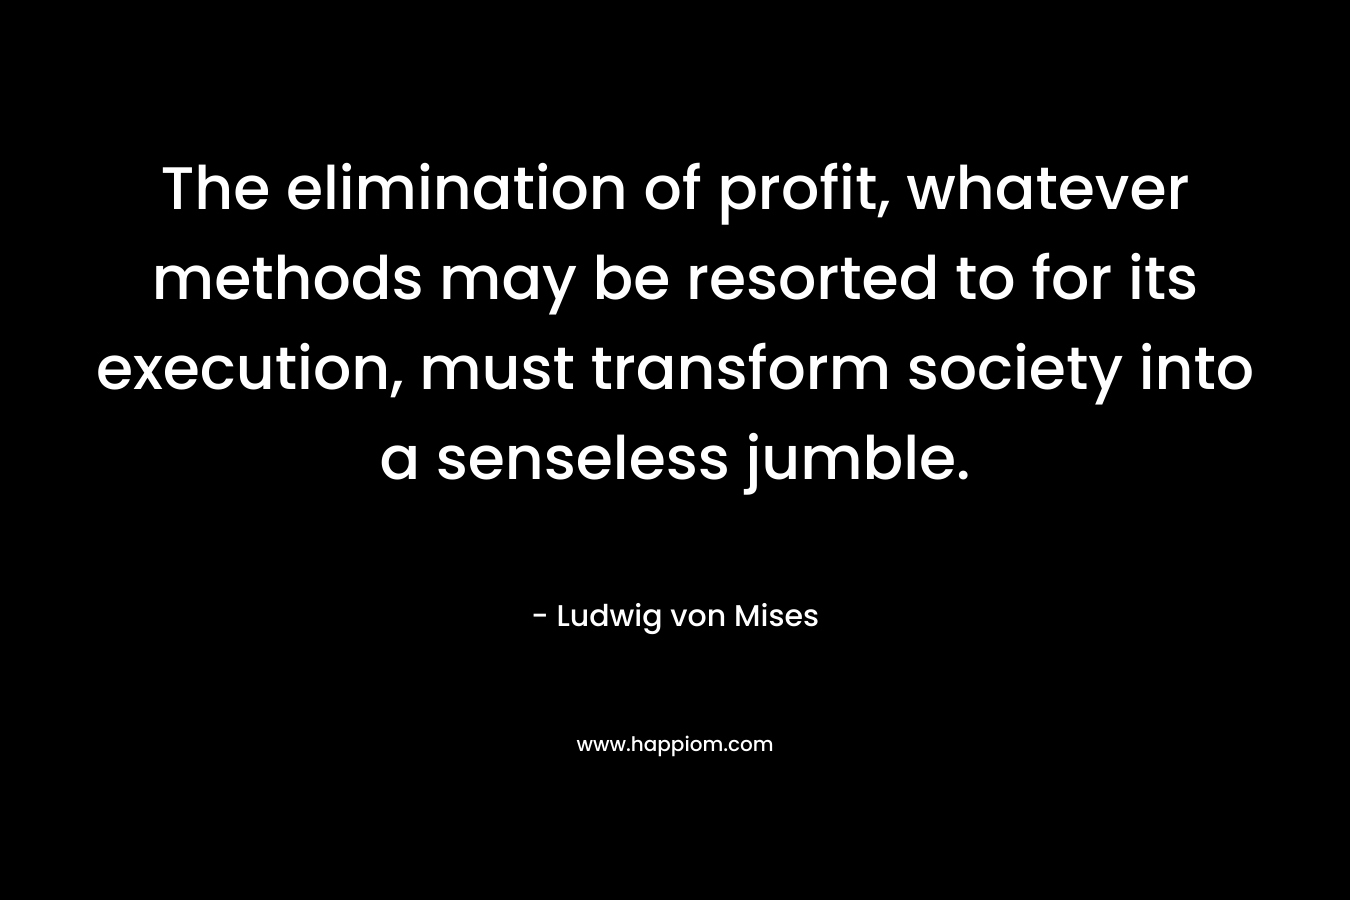 The elimination of profit, whatever methods may be resorted to for its execution, must transform society into a senseless jumble. – Ludwig von Mises